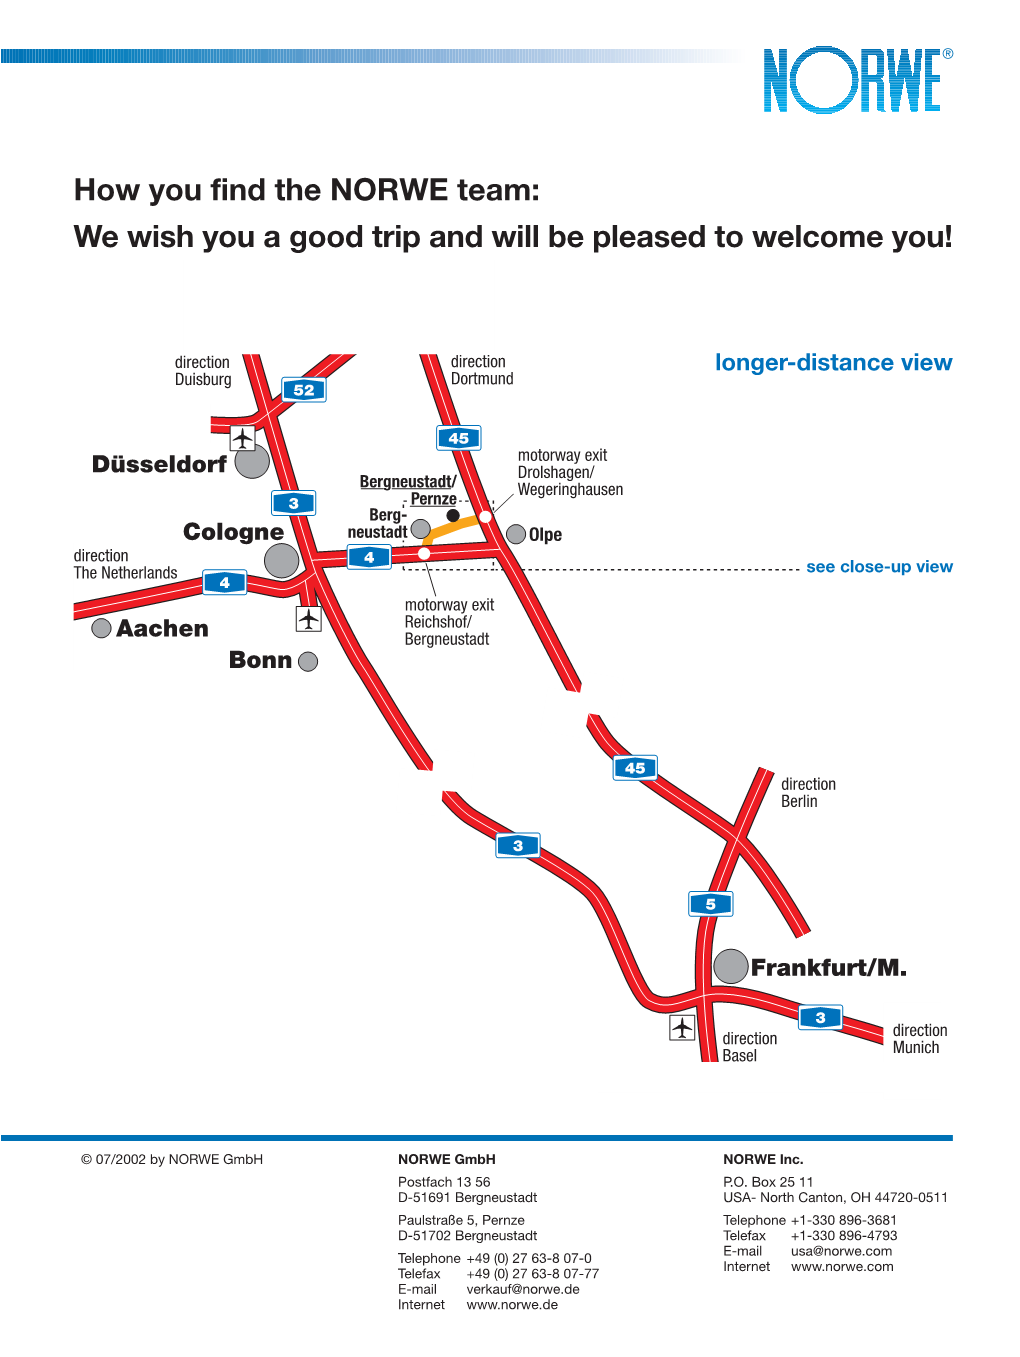 How You Find the NORWE Team: We Wish You a Good Trip and Will Be Pleased to Welcome You!